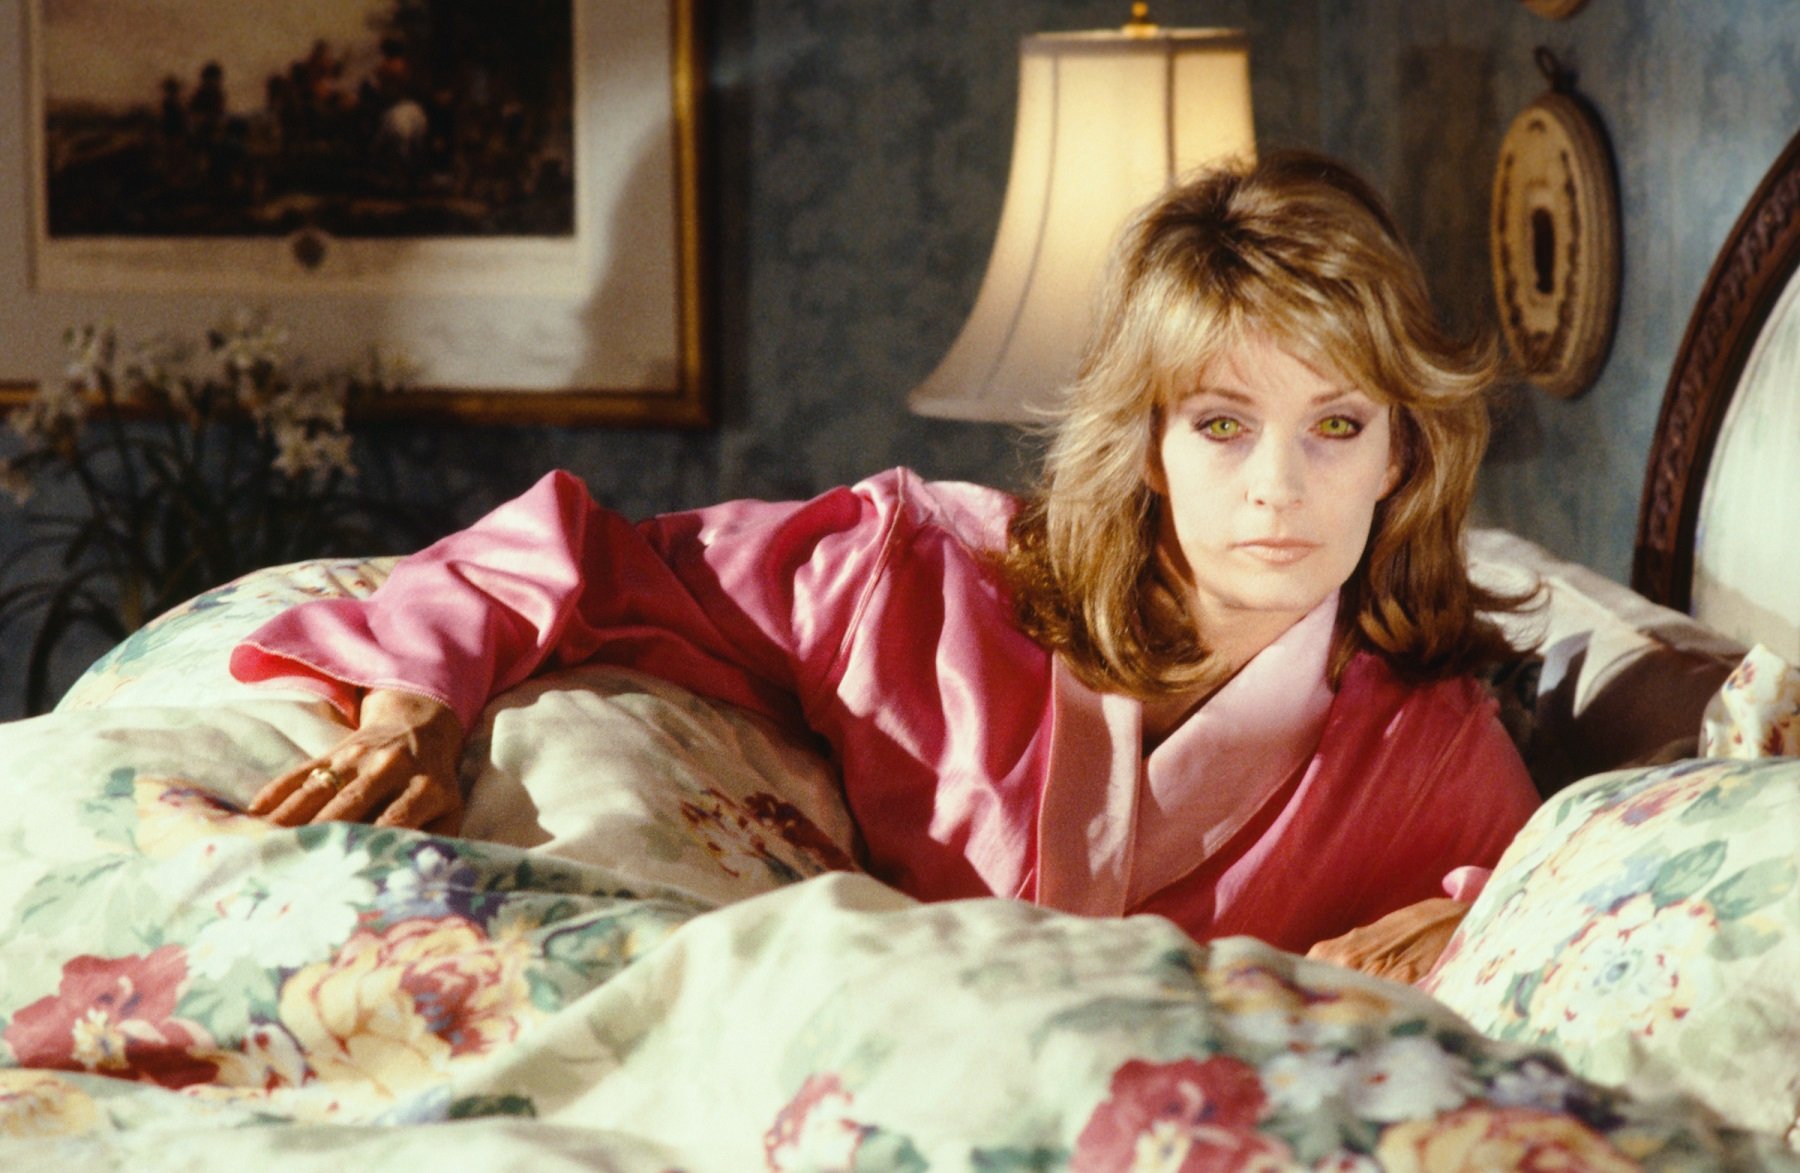 Days of Our Lives spoilers focus on Marlena, pictured here in red satin pajamas